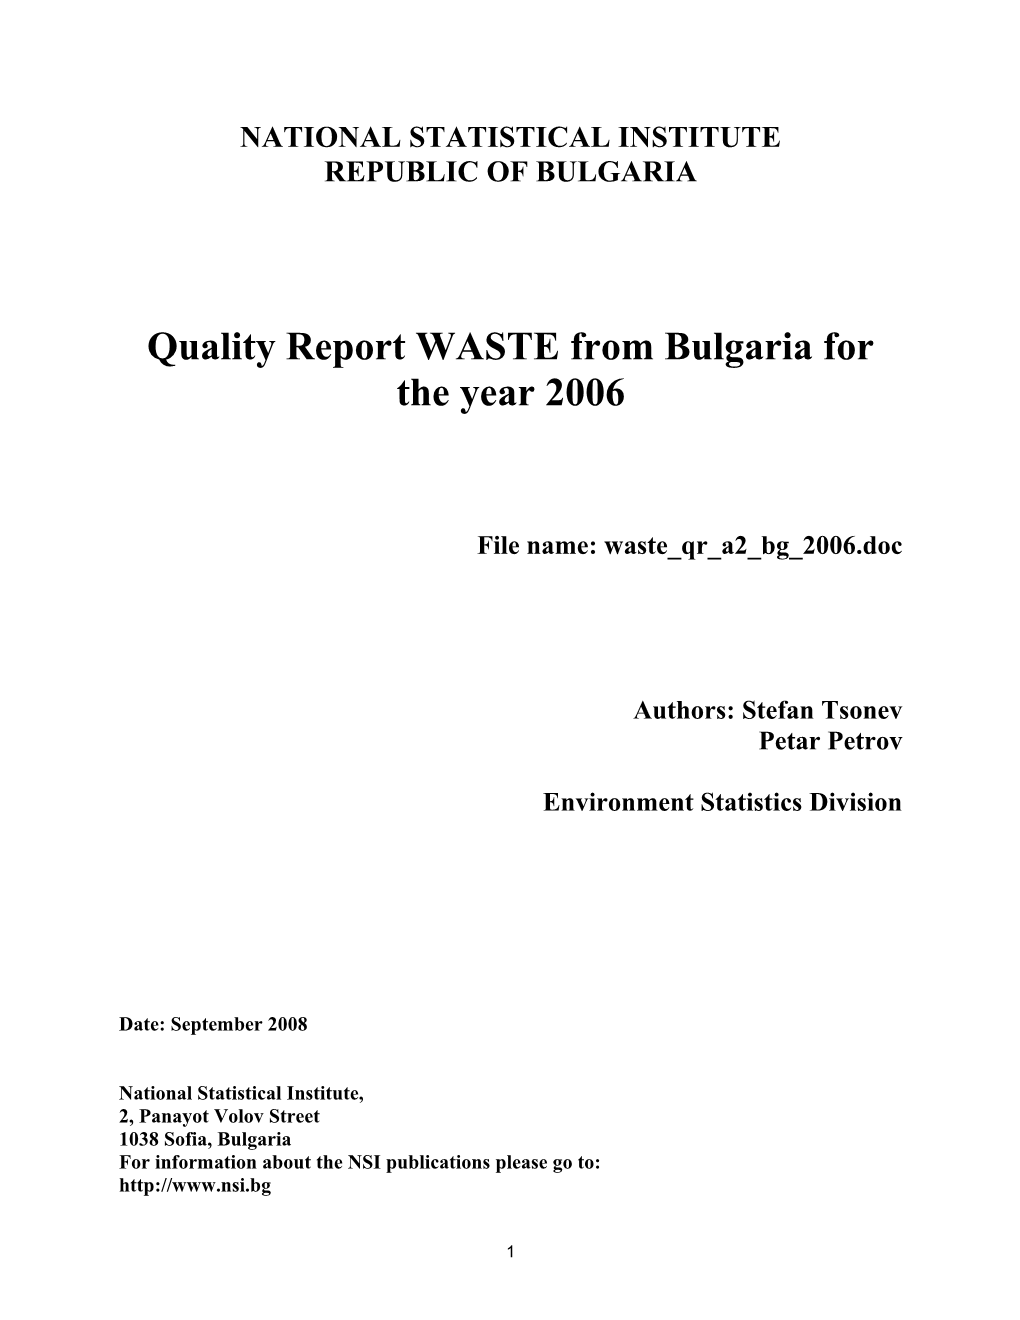 Quality Report Template 2008